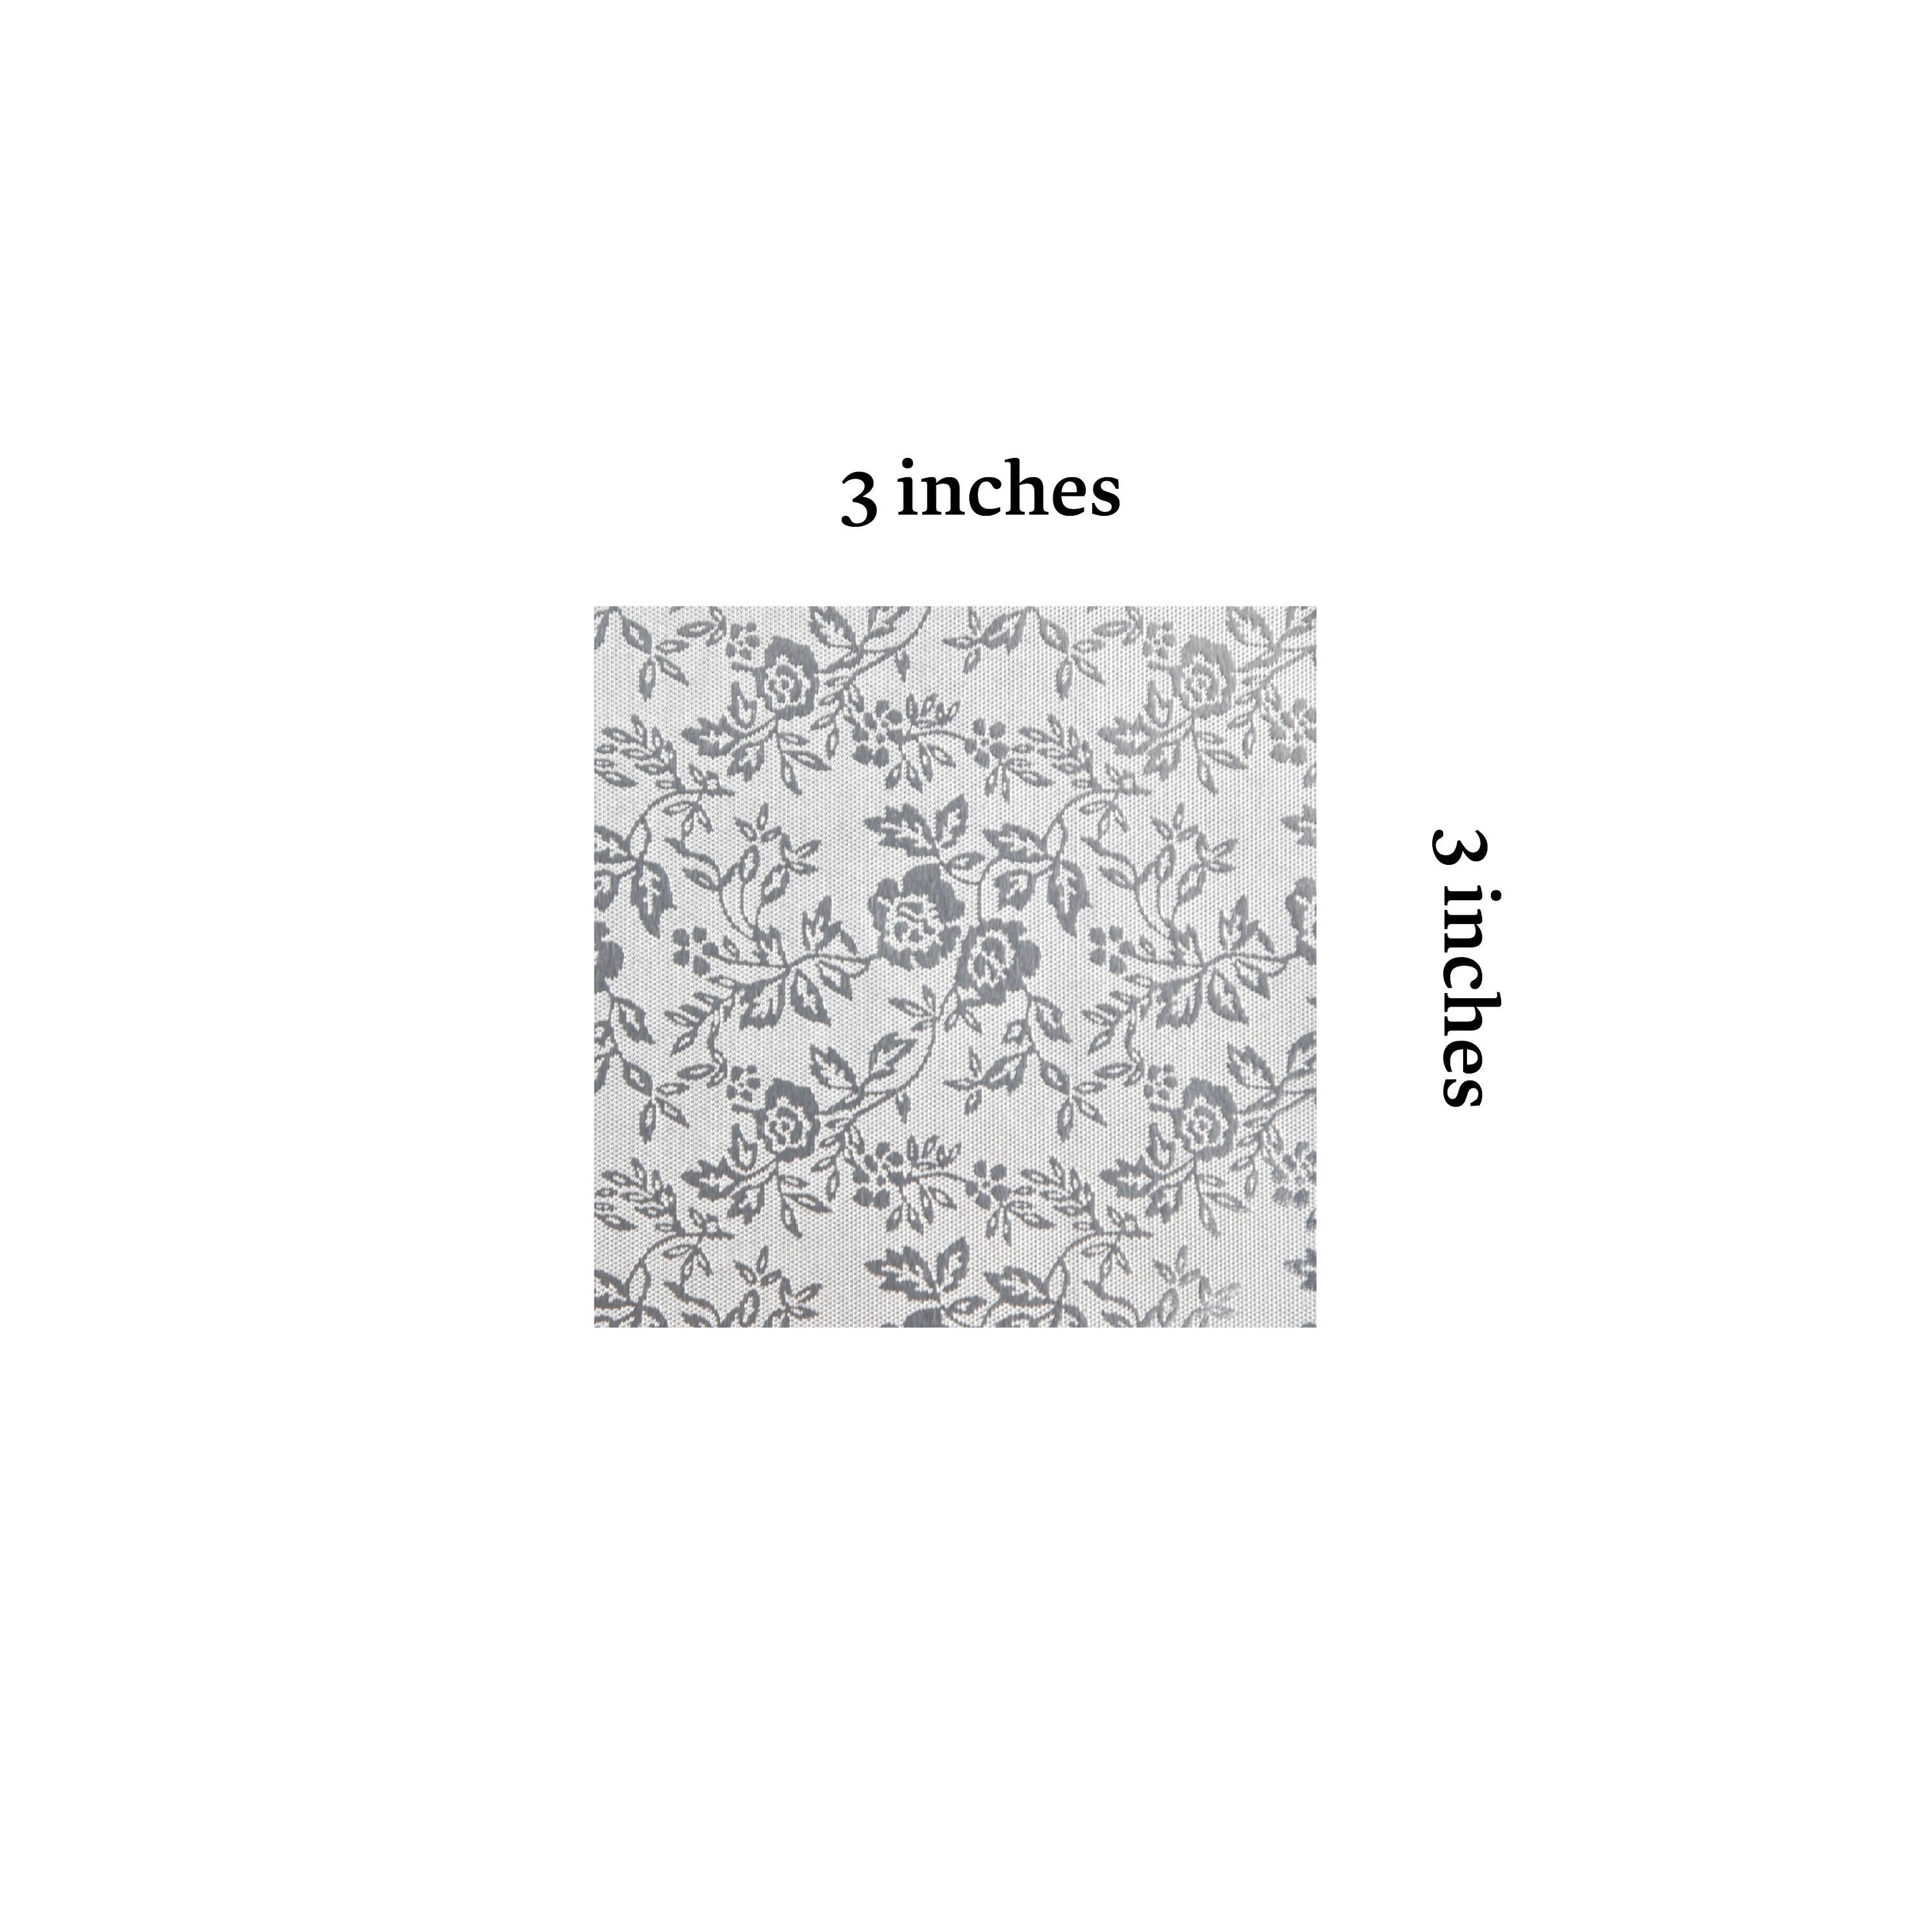 100 Silver Origami Paper Sheets Paper Pack with Flower pattern 3x3 inches